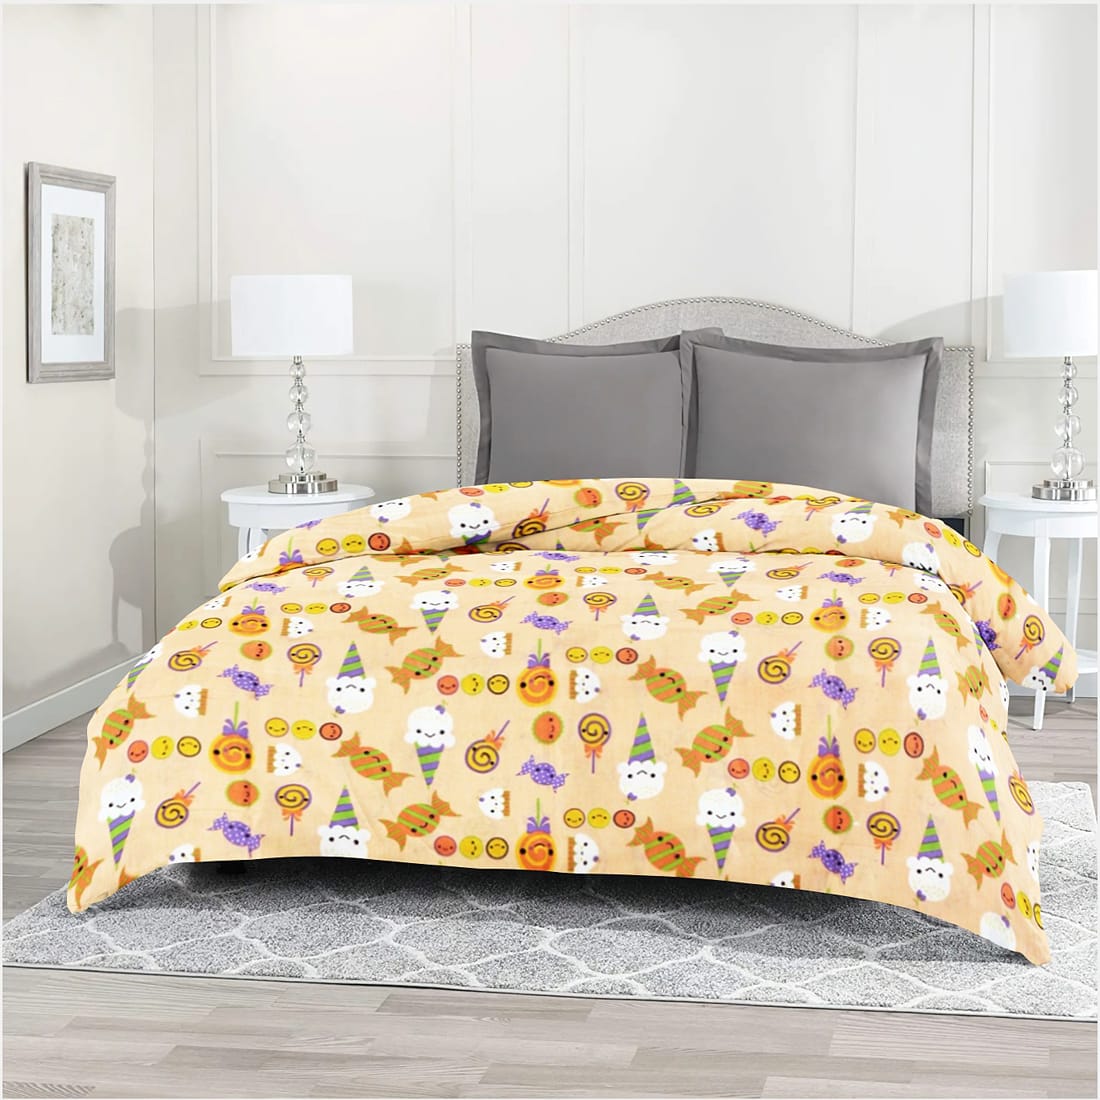 Kids Funky Candy Print Single Bed Cotton Duvet Cover with Zipper in Orange online (1pc)